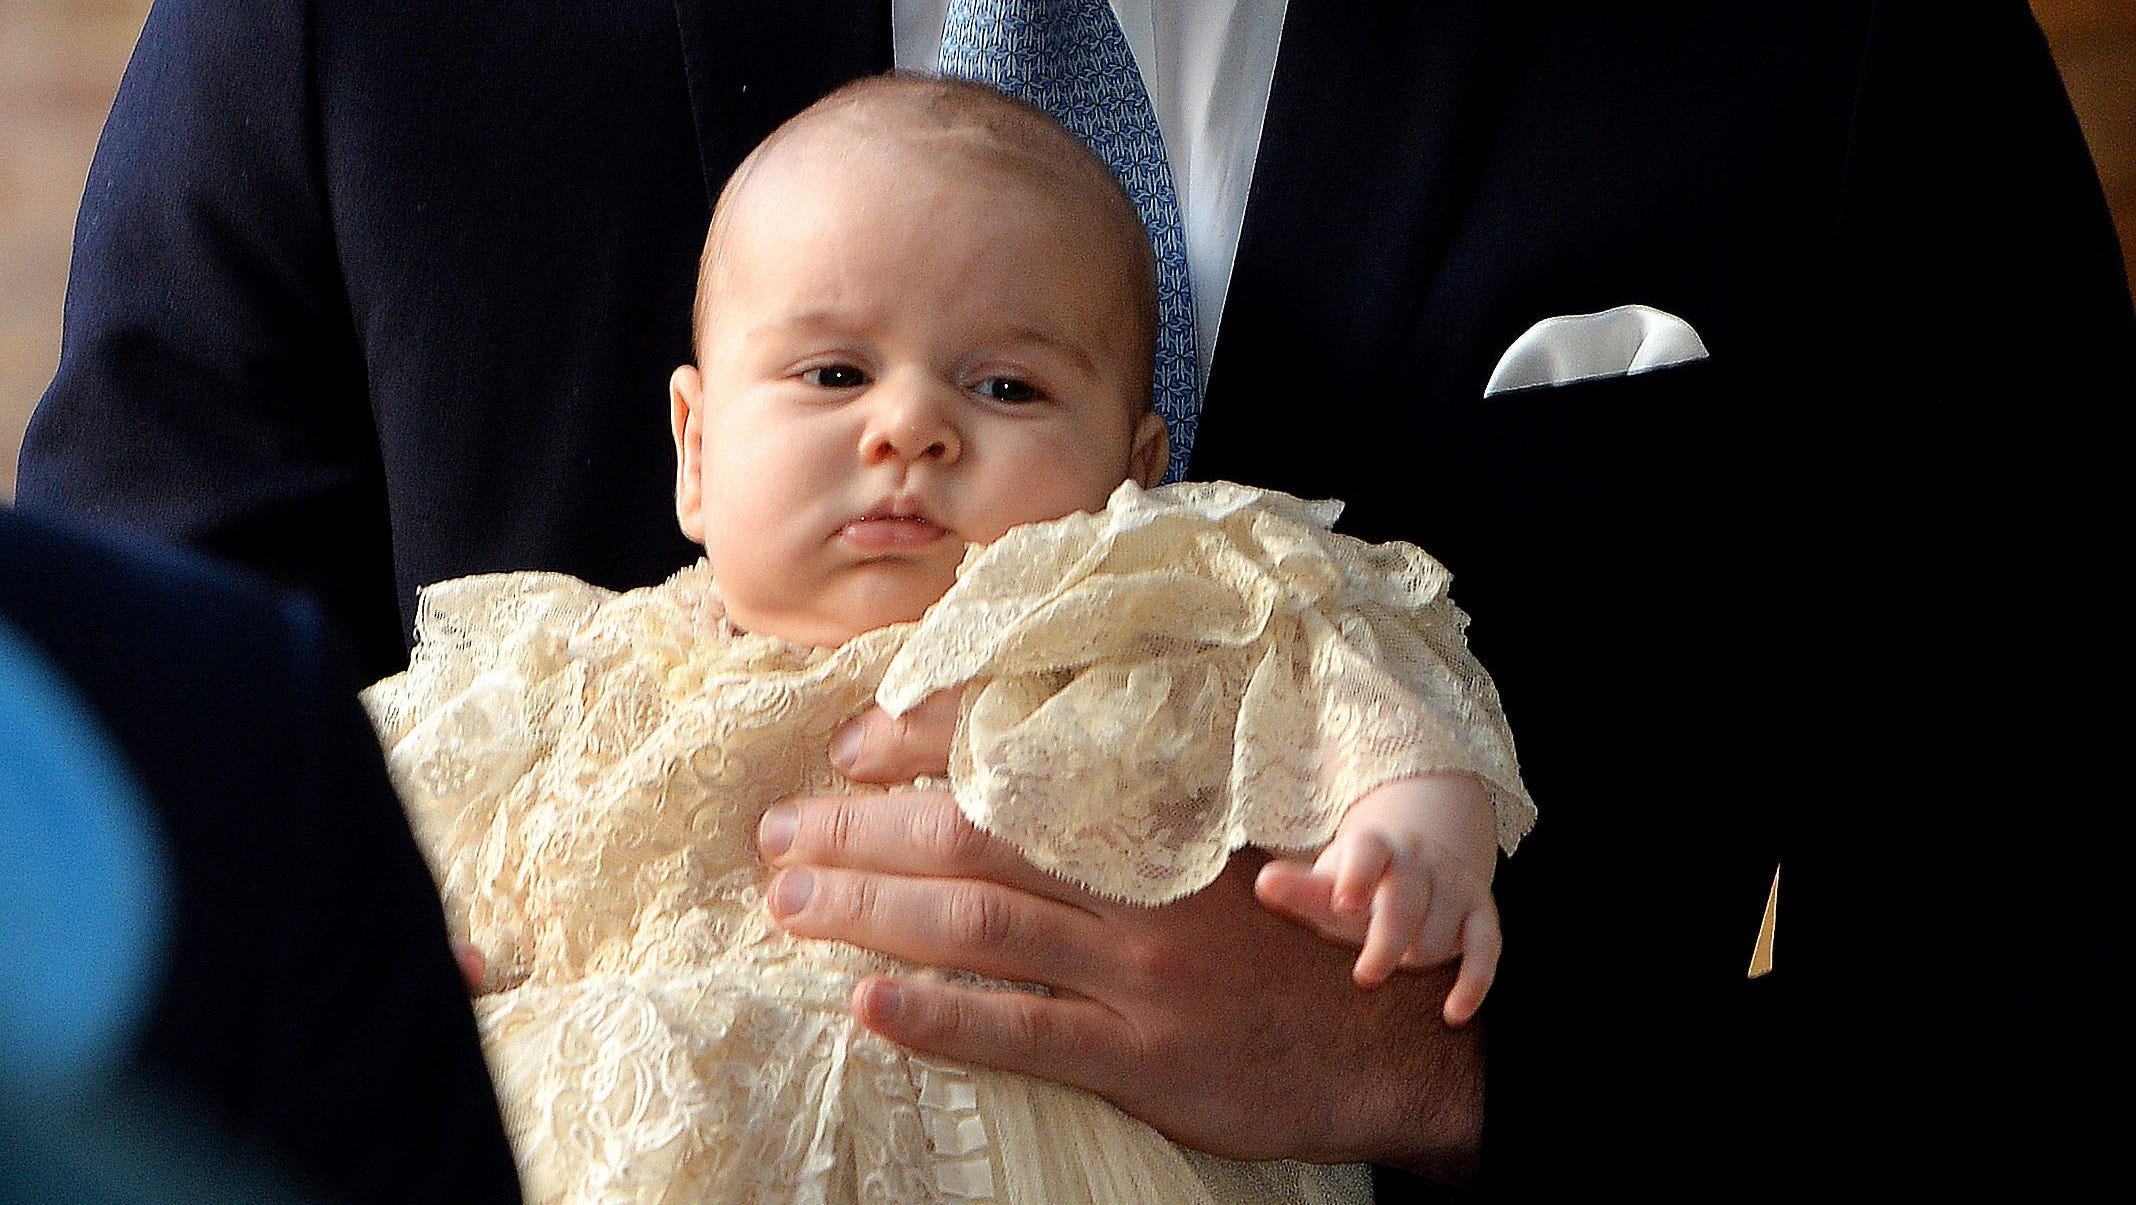 Best reader captions on Prince George christening photo